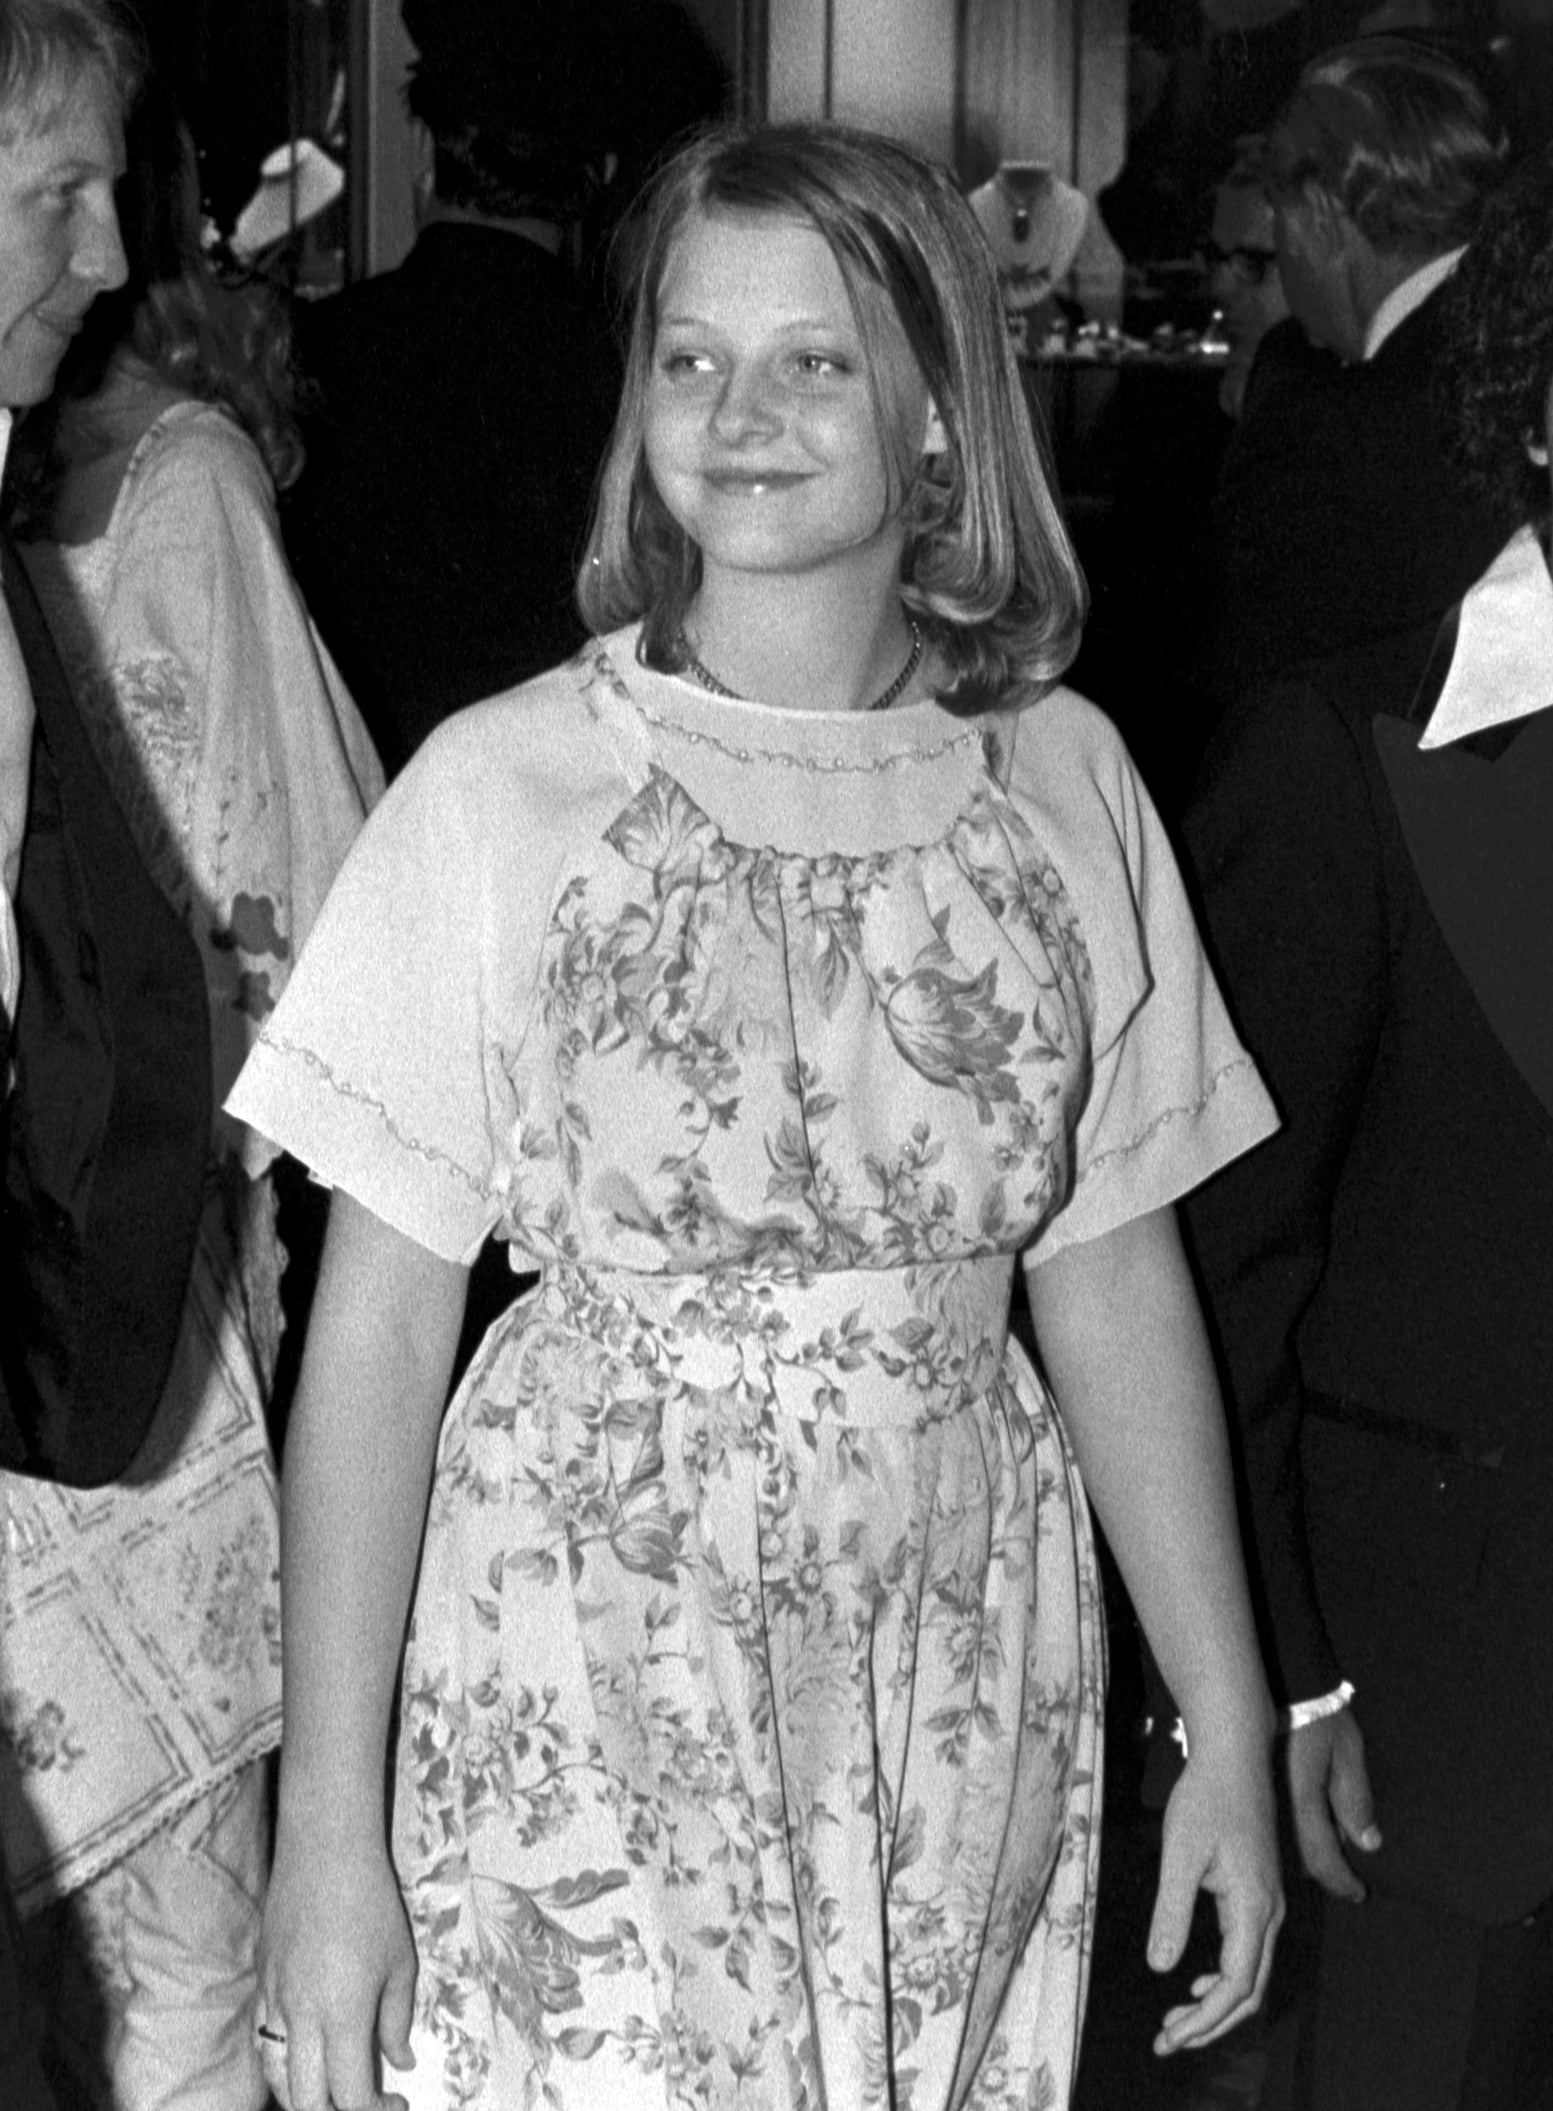 Young Jodie Foster